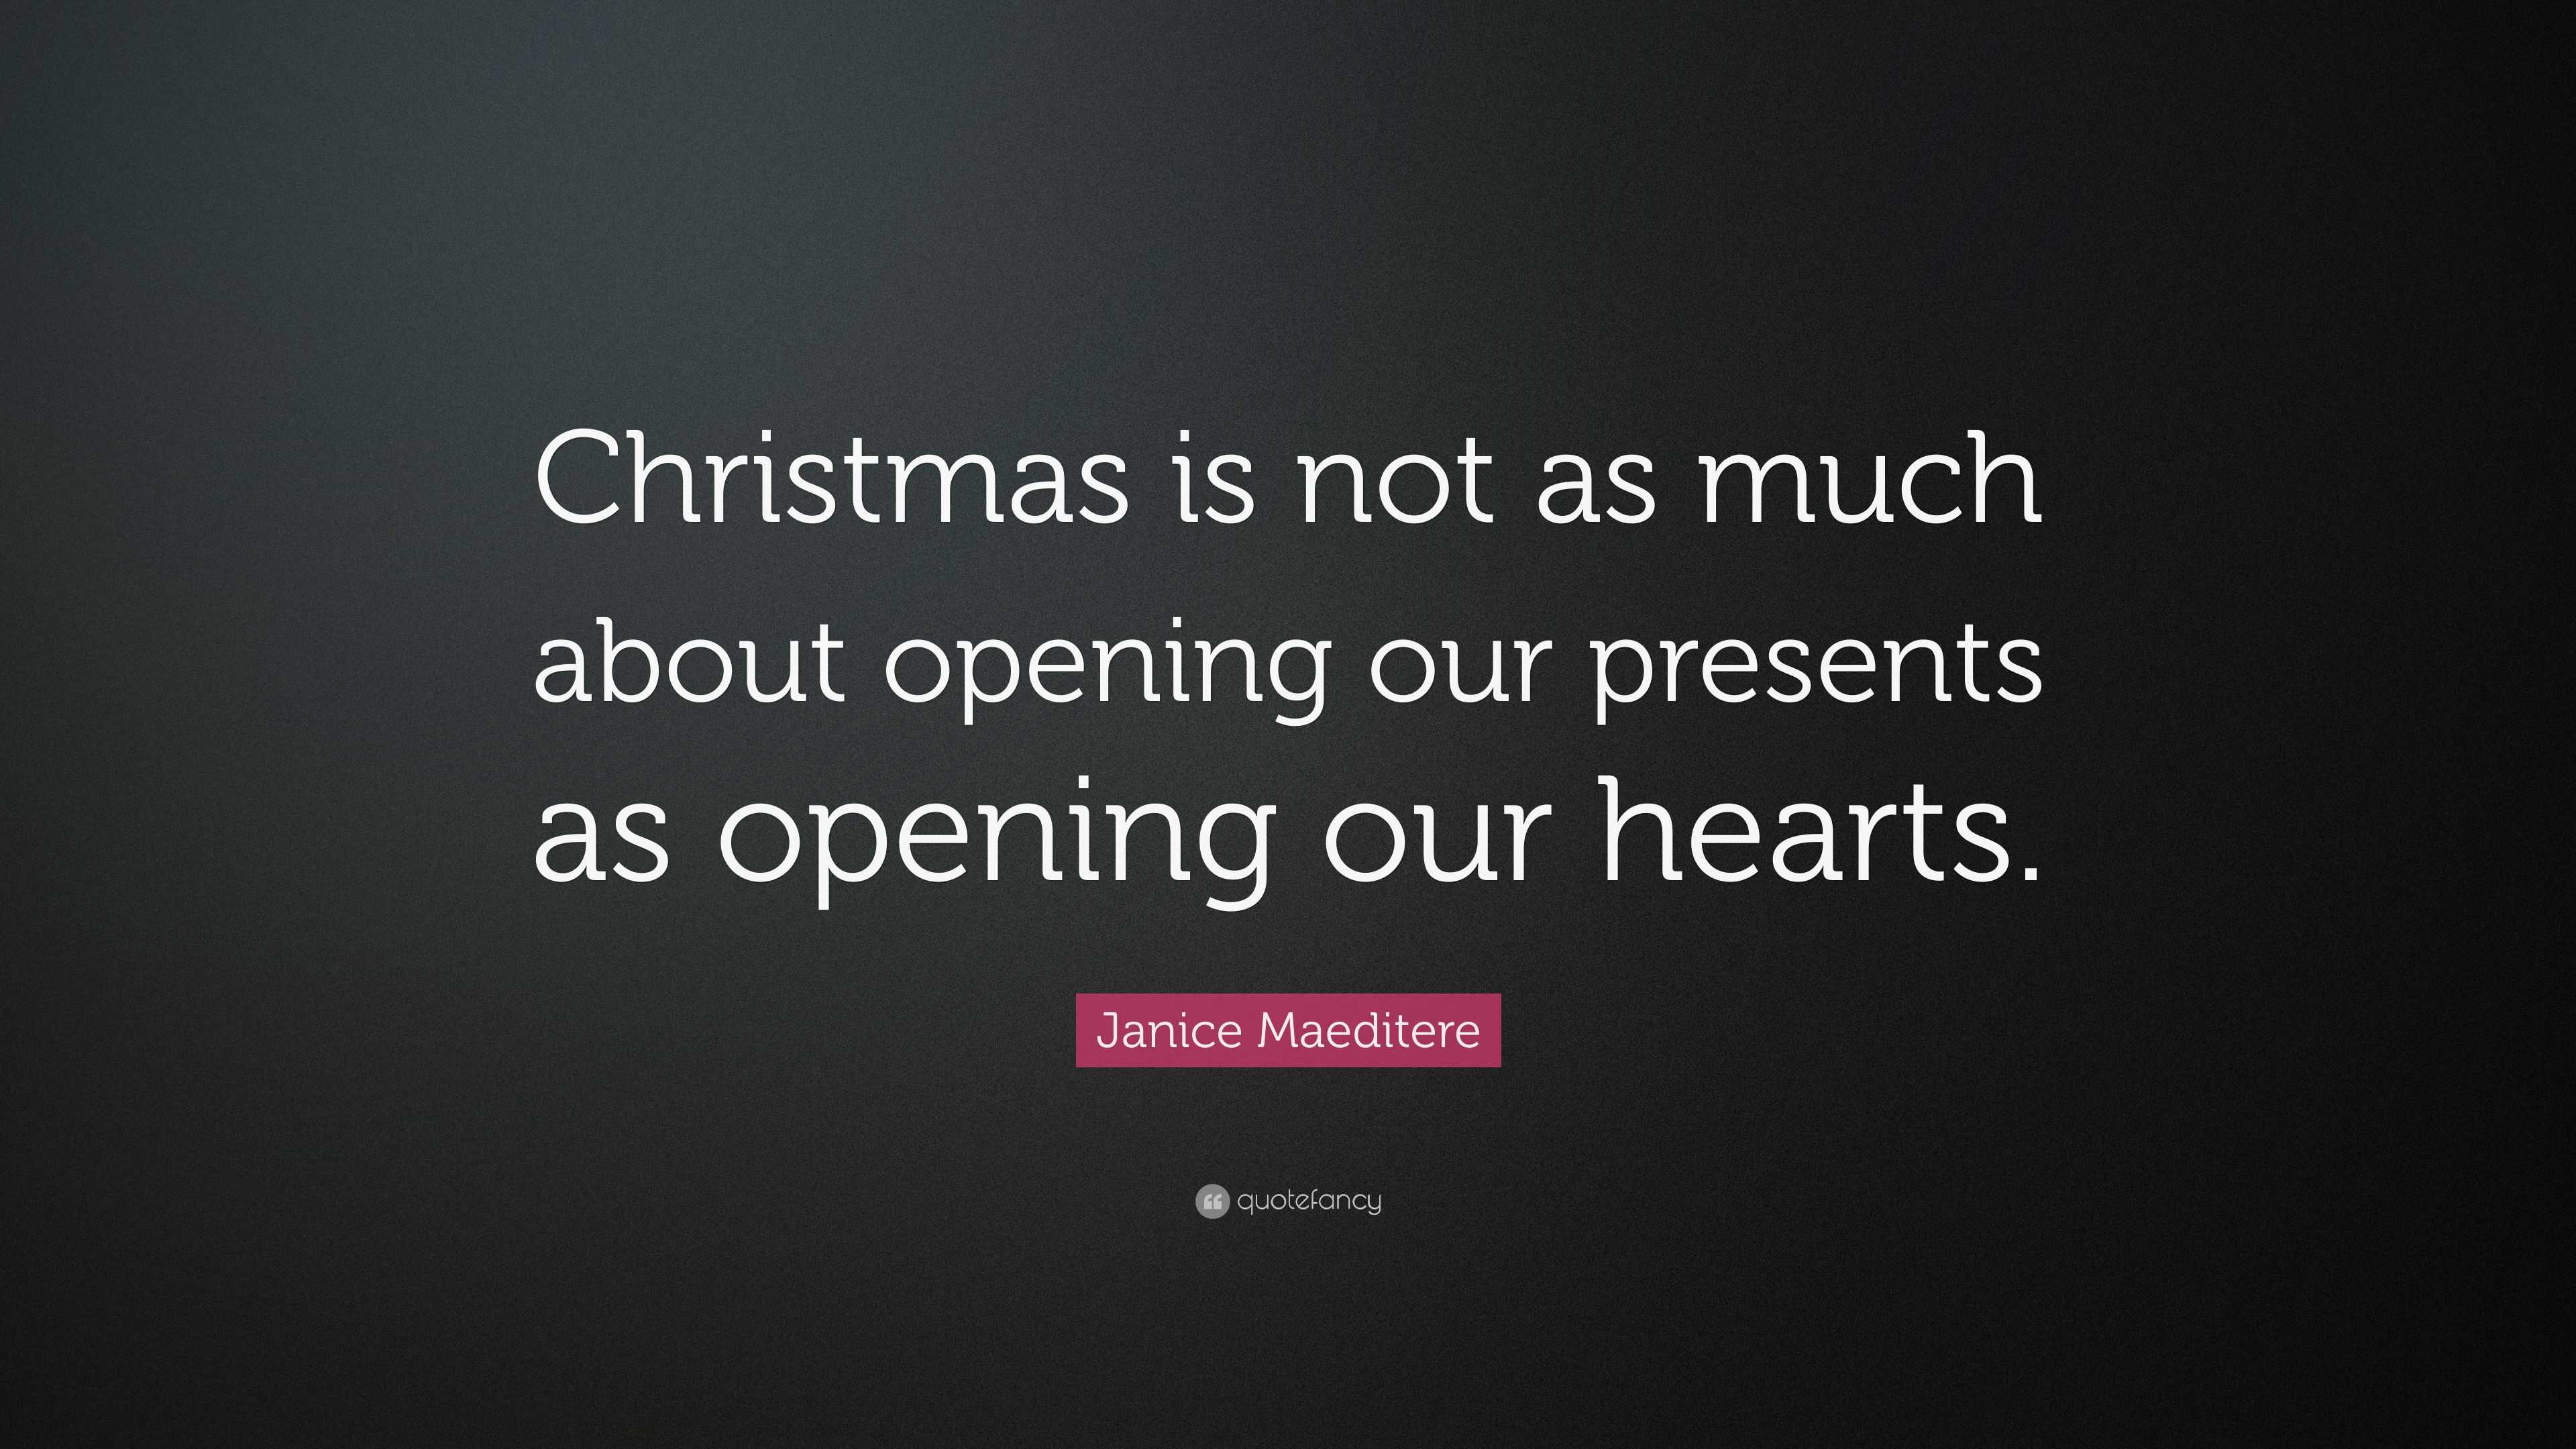 Janice Maeditere Quote: “Christmas is not as much about opening our ...